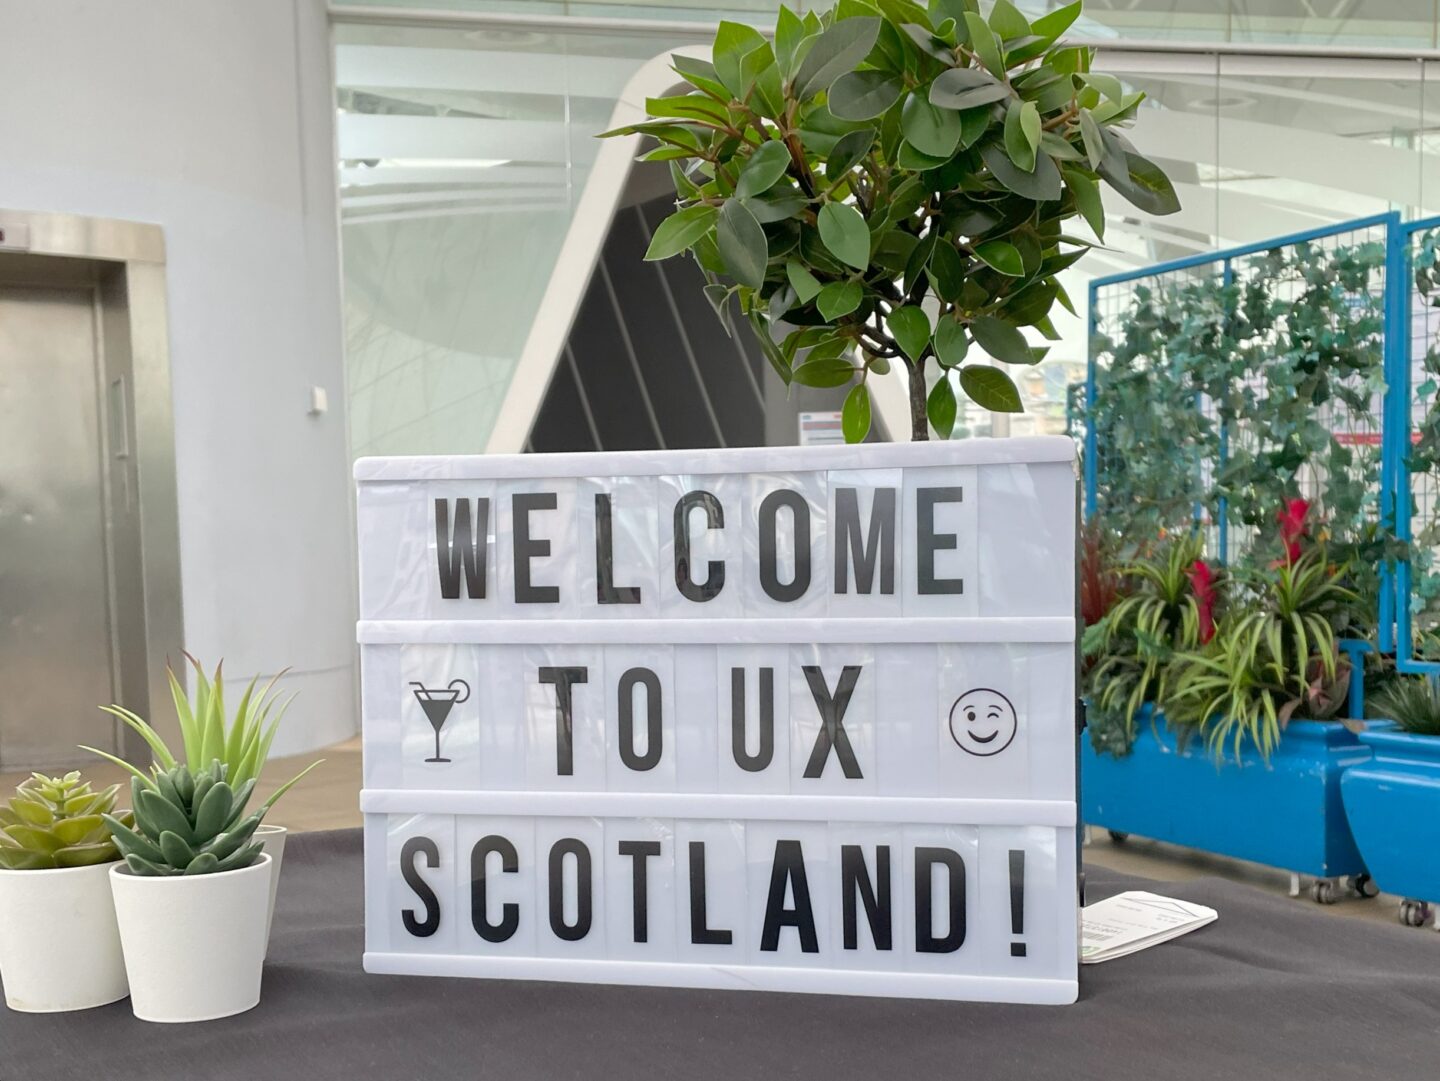 Sign box from event "Welcome to UX Scotland"